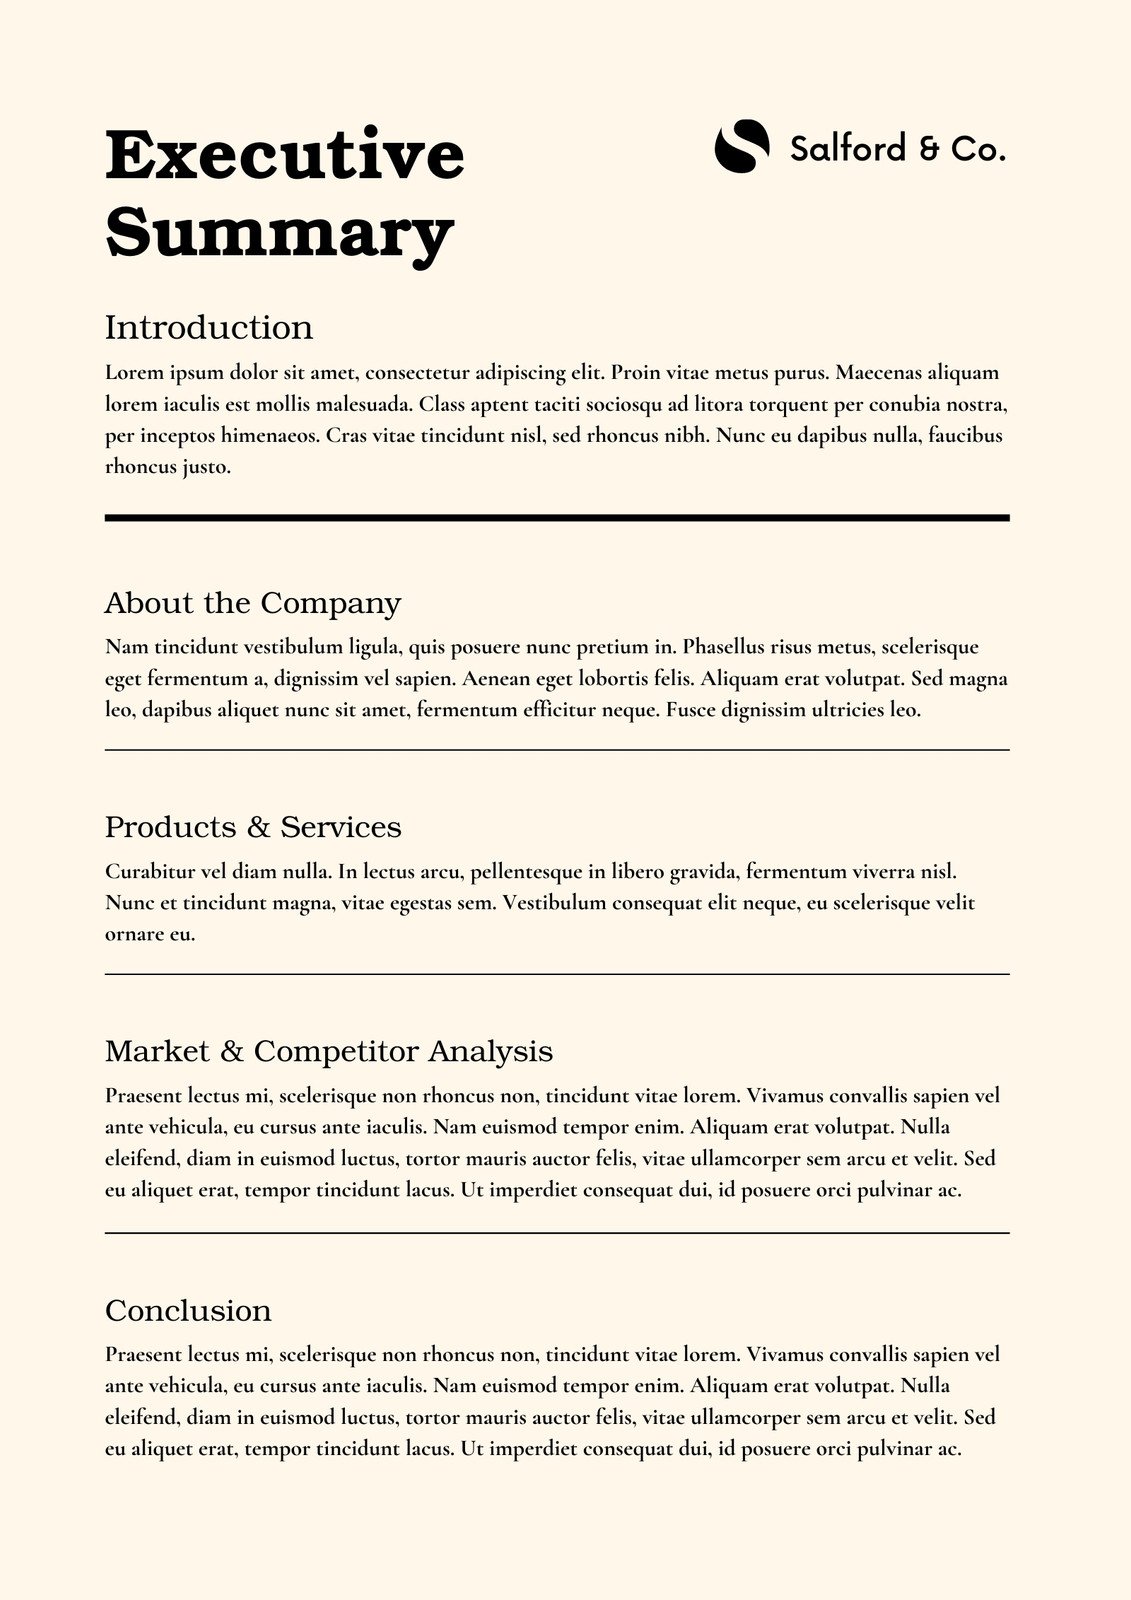 executive summary of business plan template